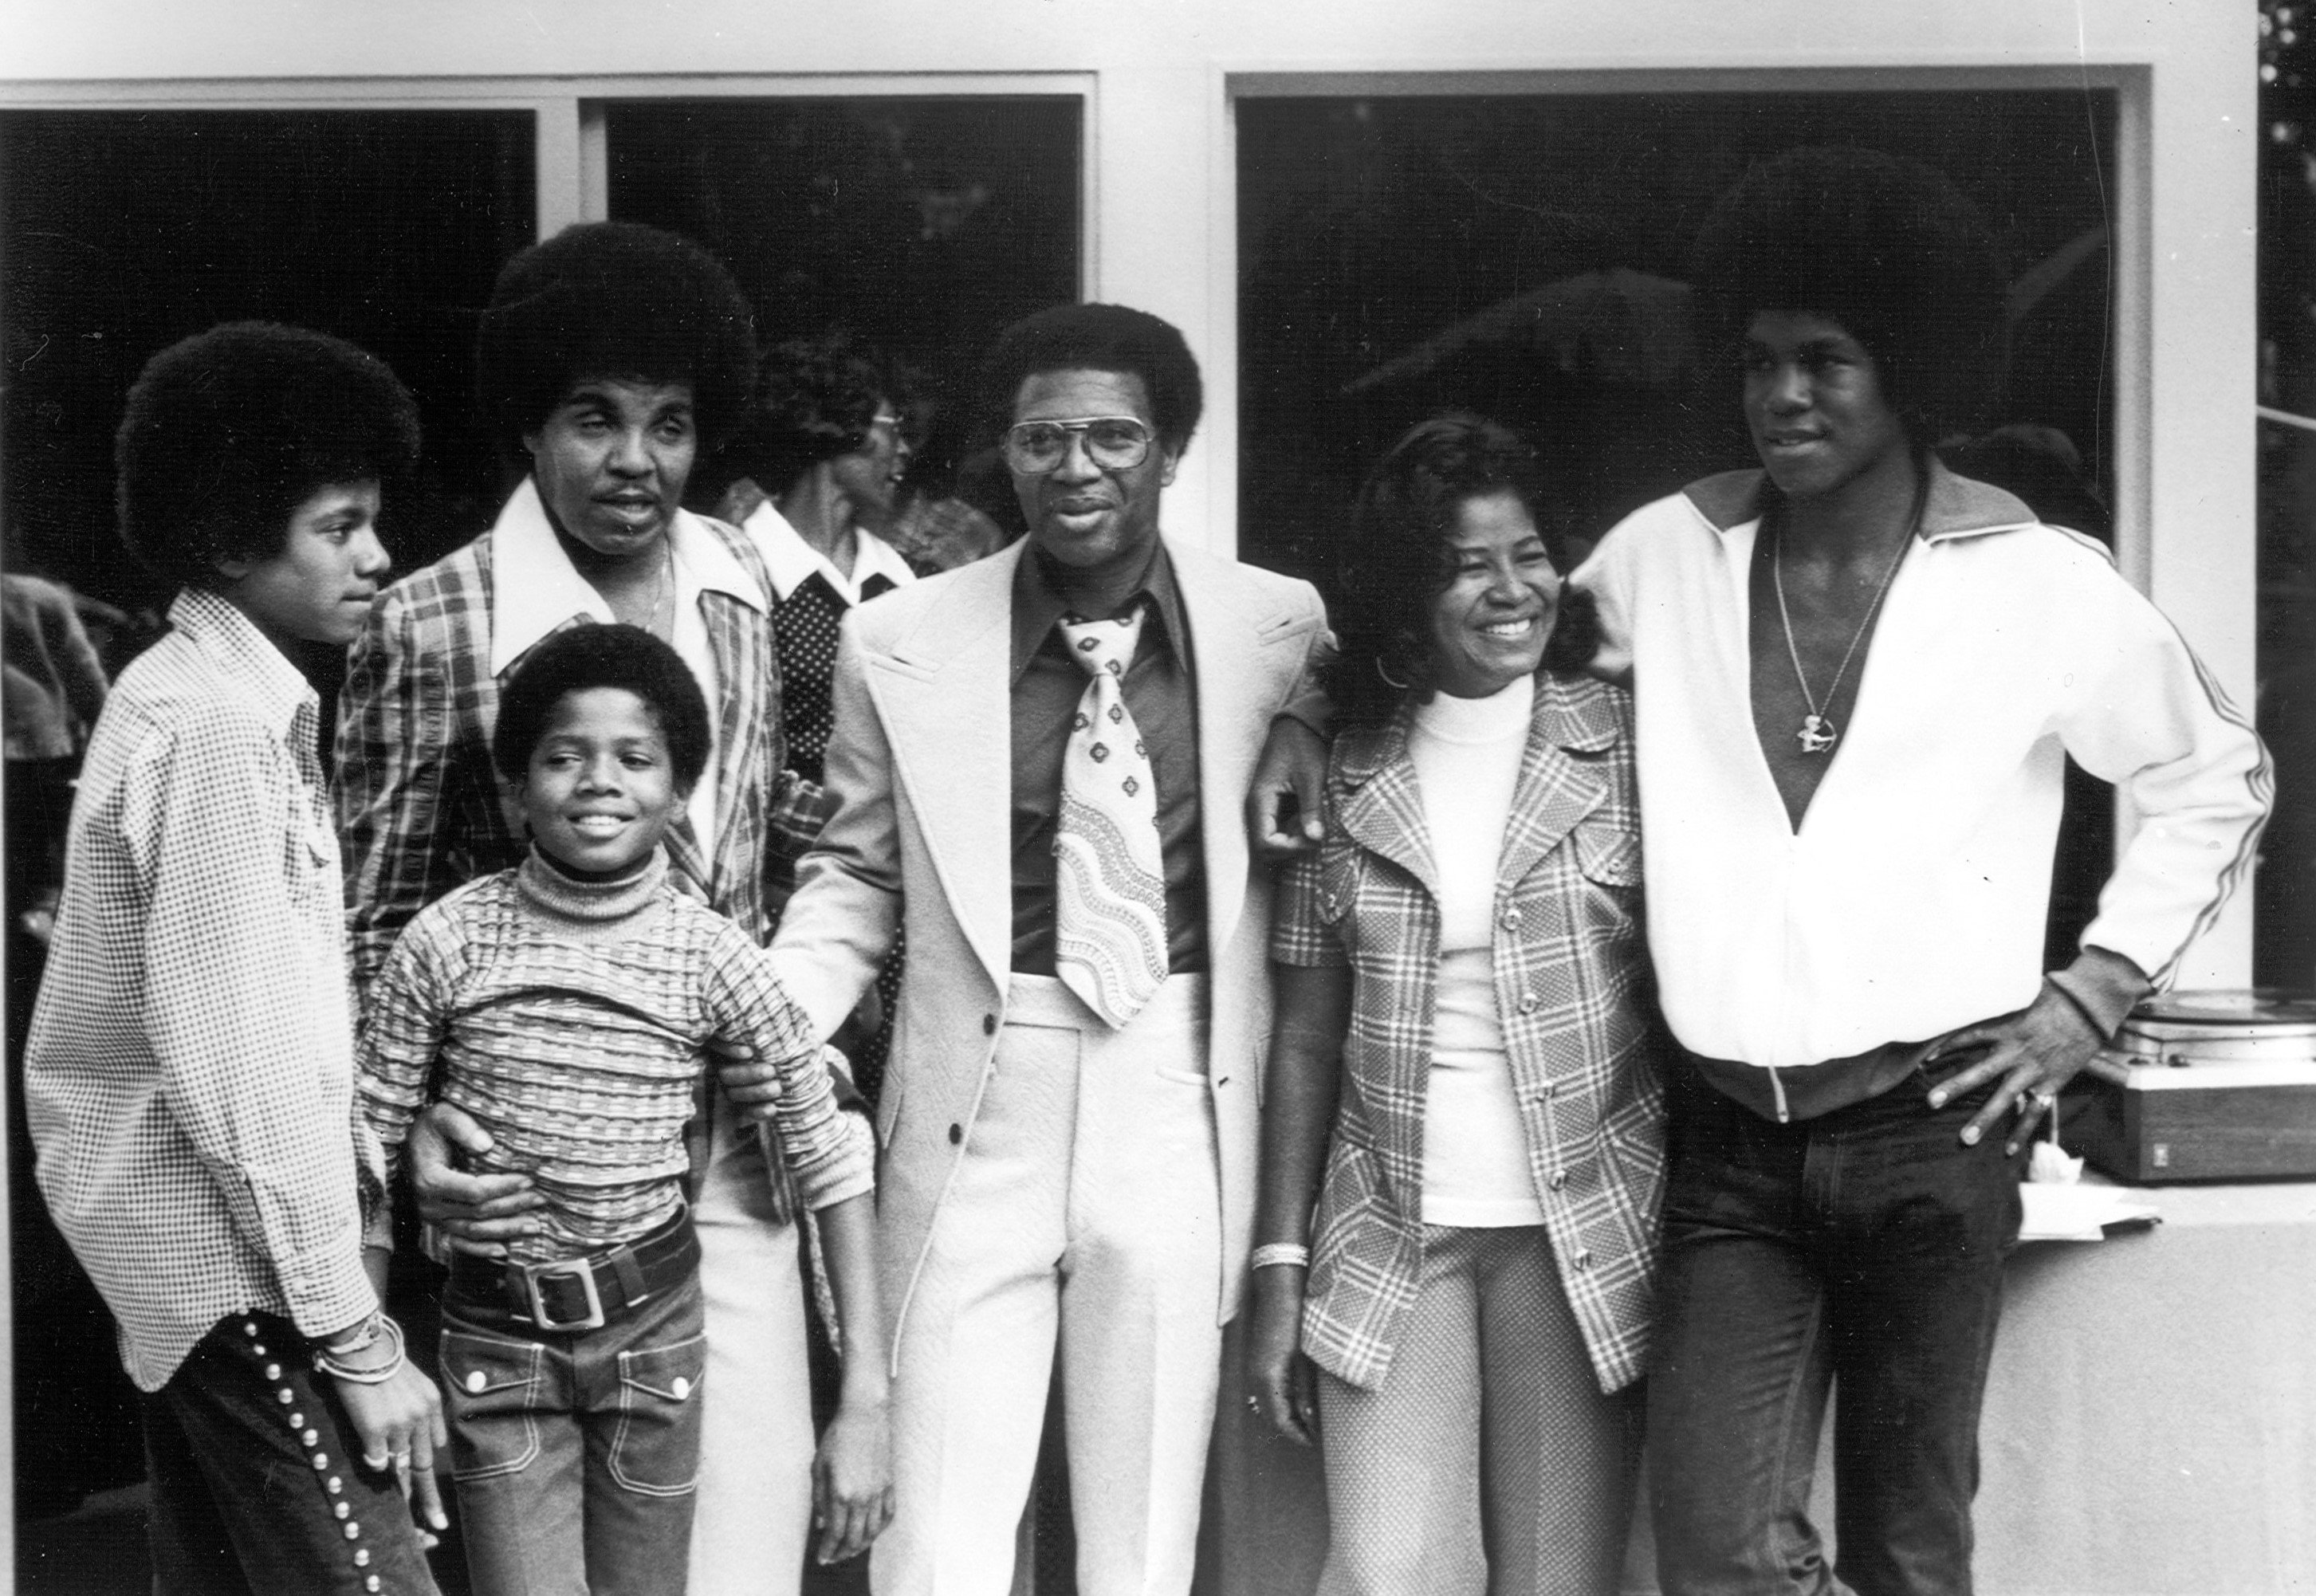 Michael, Randy and Jermaine of the "Jackson 5" with their parents, Katherine and Joe Jackson and Jr. Walker in 1970. | Source: Getty Images